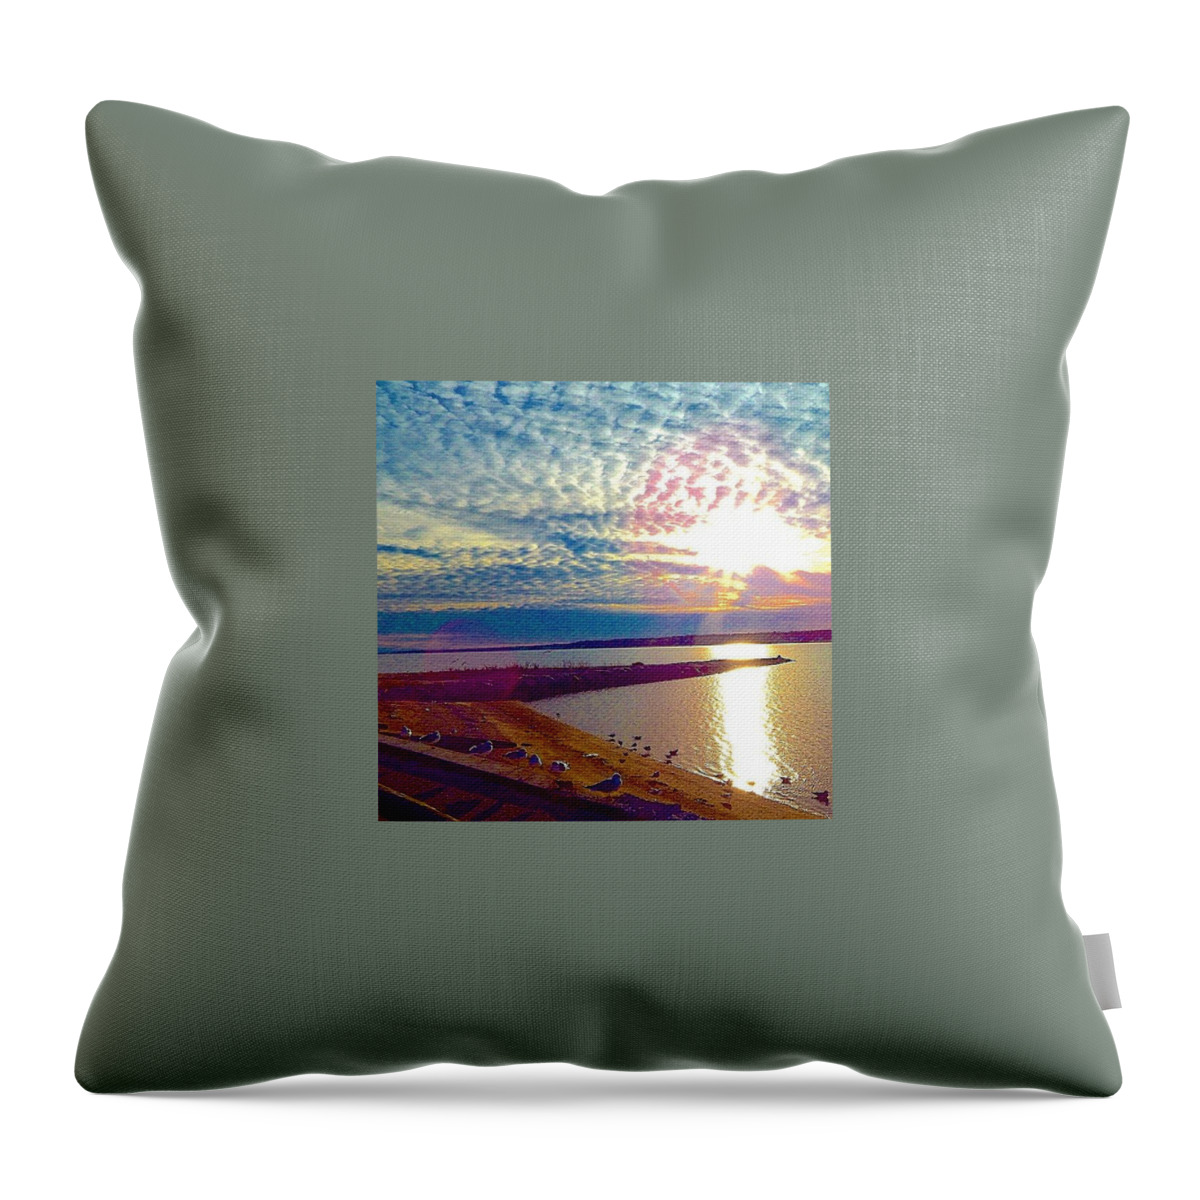 Sunset Throw Pillow featuring the photograph A Southend Sunset by Kate Arsenault 